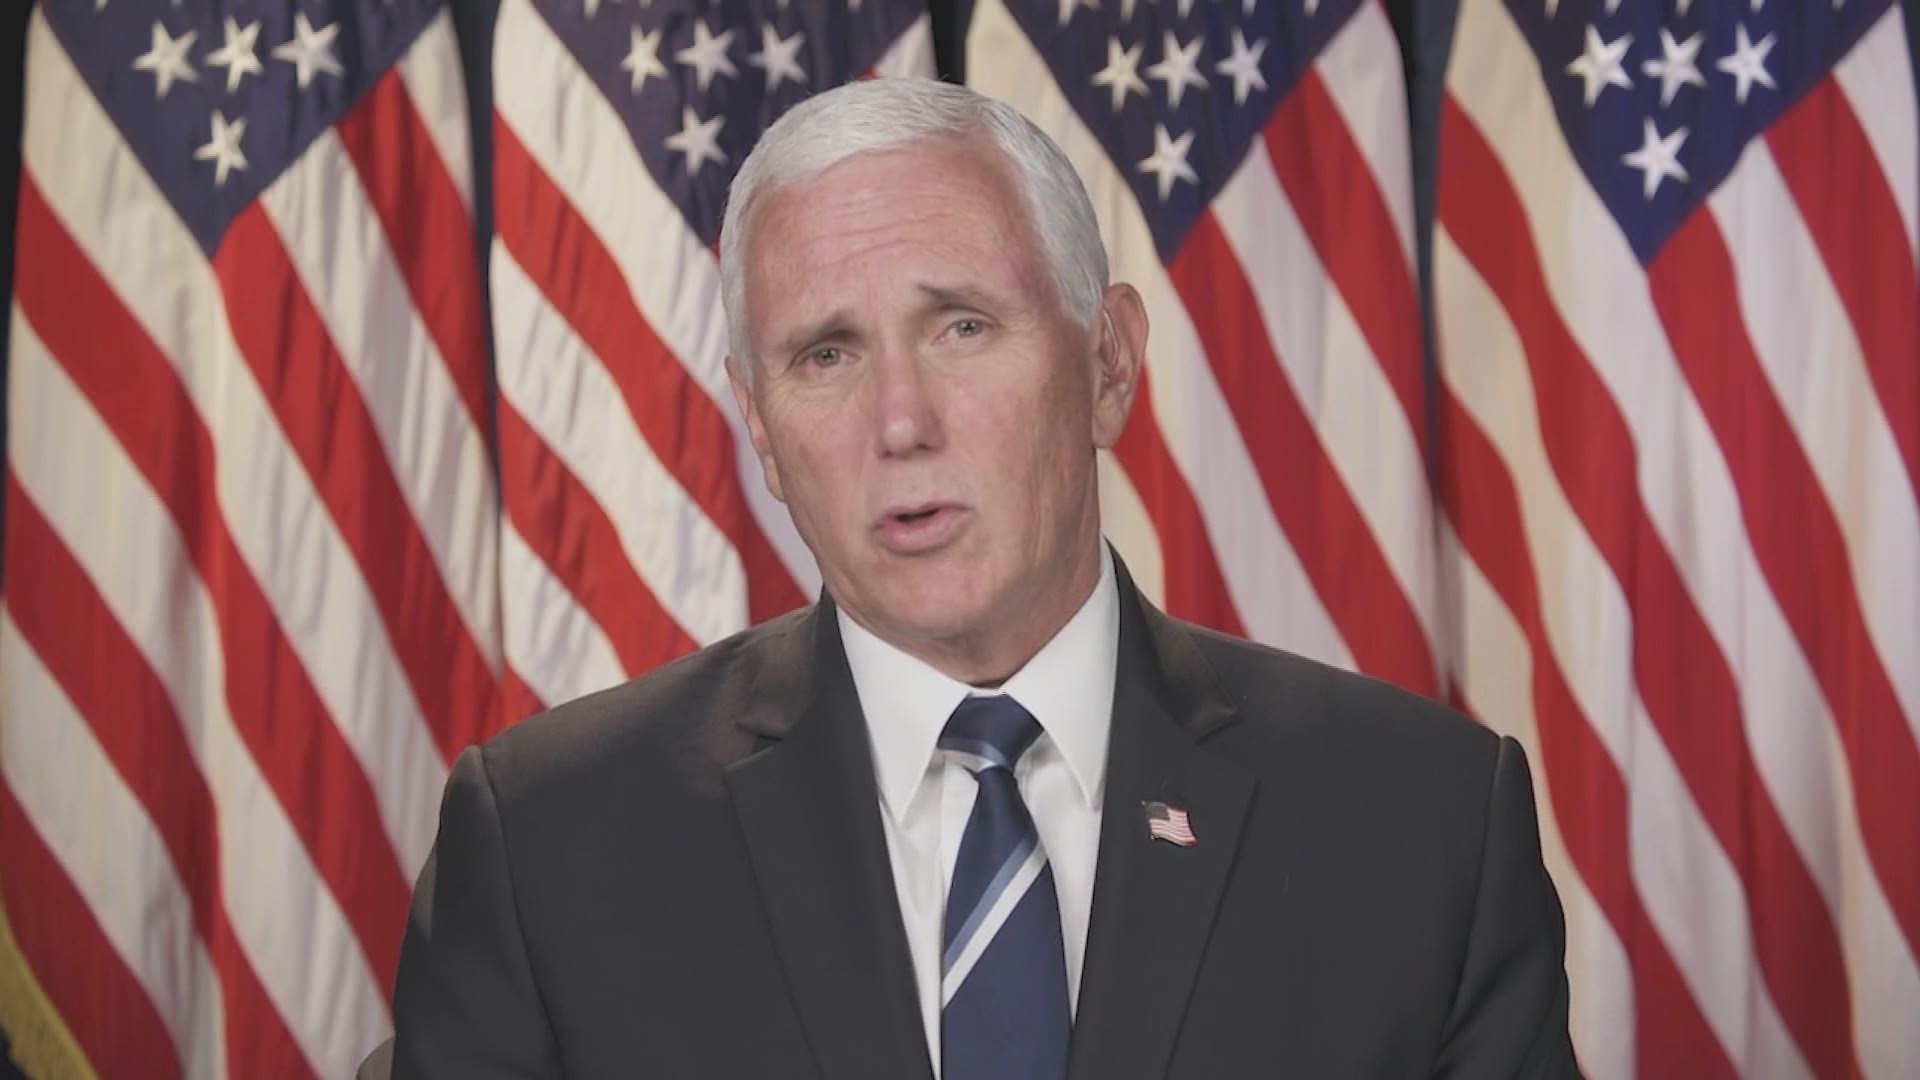 In an exclusive interview with Local 5 on Tuesday, Vice President Mike Pence said kids need to get back into the classroom as soon as possible, and the CDC agrees.